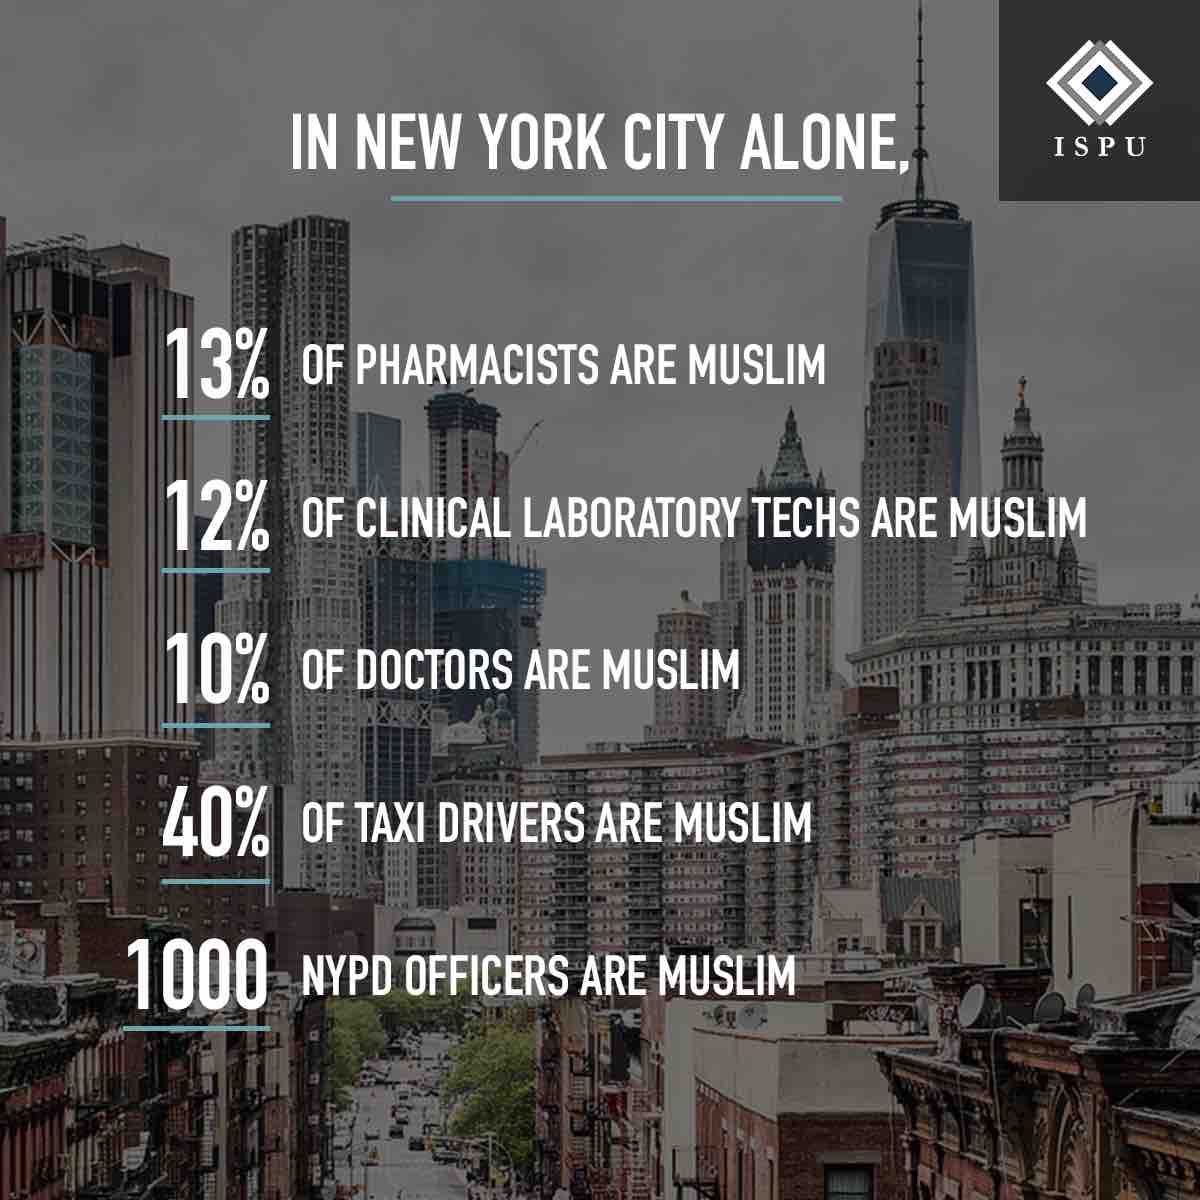 In NYC alone, 13% of pharmacists are Muslim, 12% of clinical lab techs are Muslim, 10% of doctors are Muslim, 40% of taxi drivers are Muslim, and 1000 NYPD officers are Muslim.